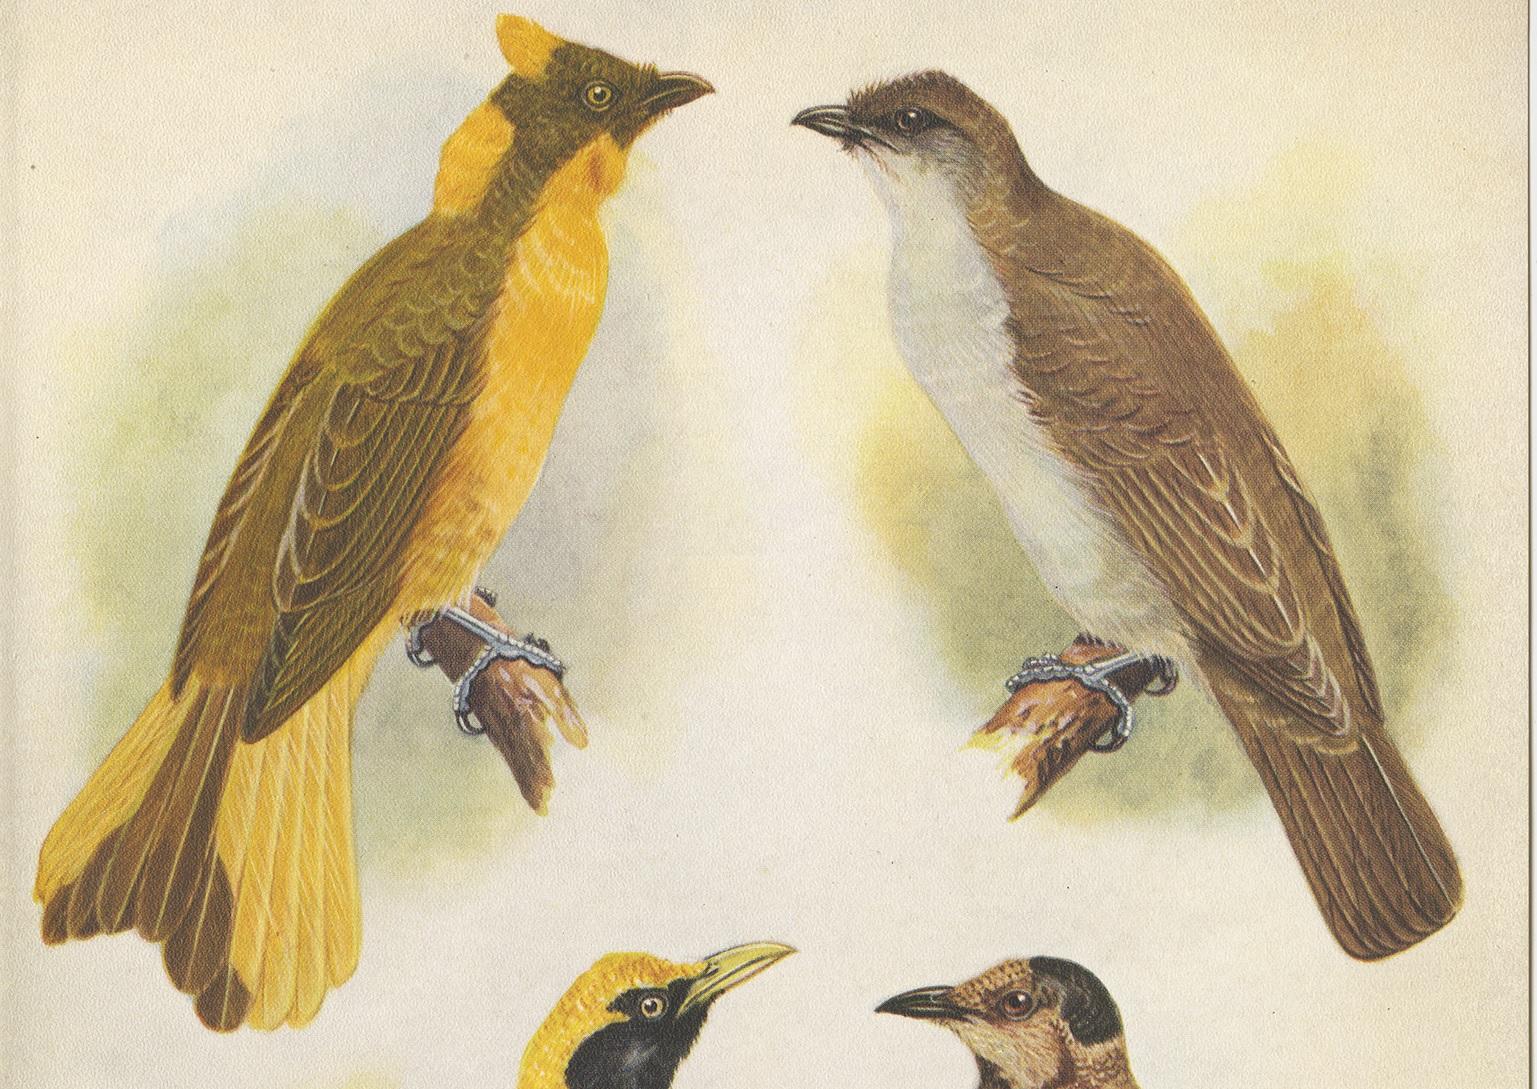 Decorative print illustrating the Newton's Bower-Bird and the Regent Bird. This authentic print originates from 'Birds of Paradise and Bower Birds' by Tom Iredale. With coloured illustrations of Every Species by Lilian Medland. Published in 1950.